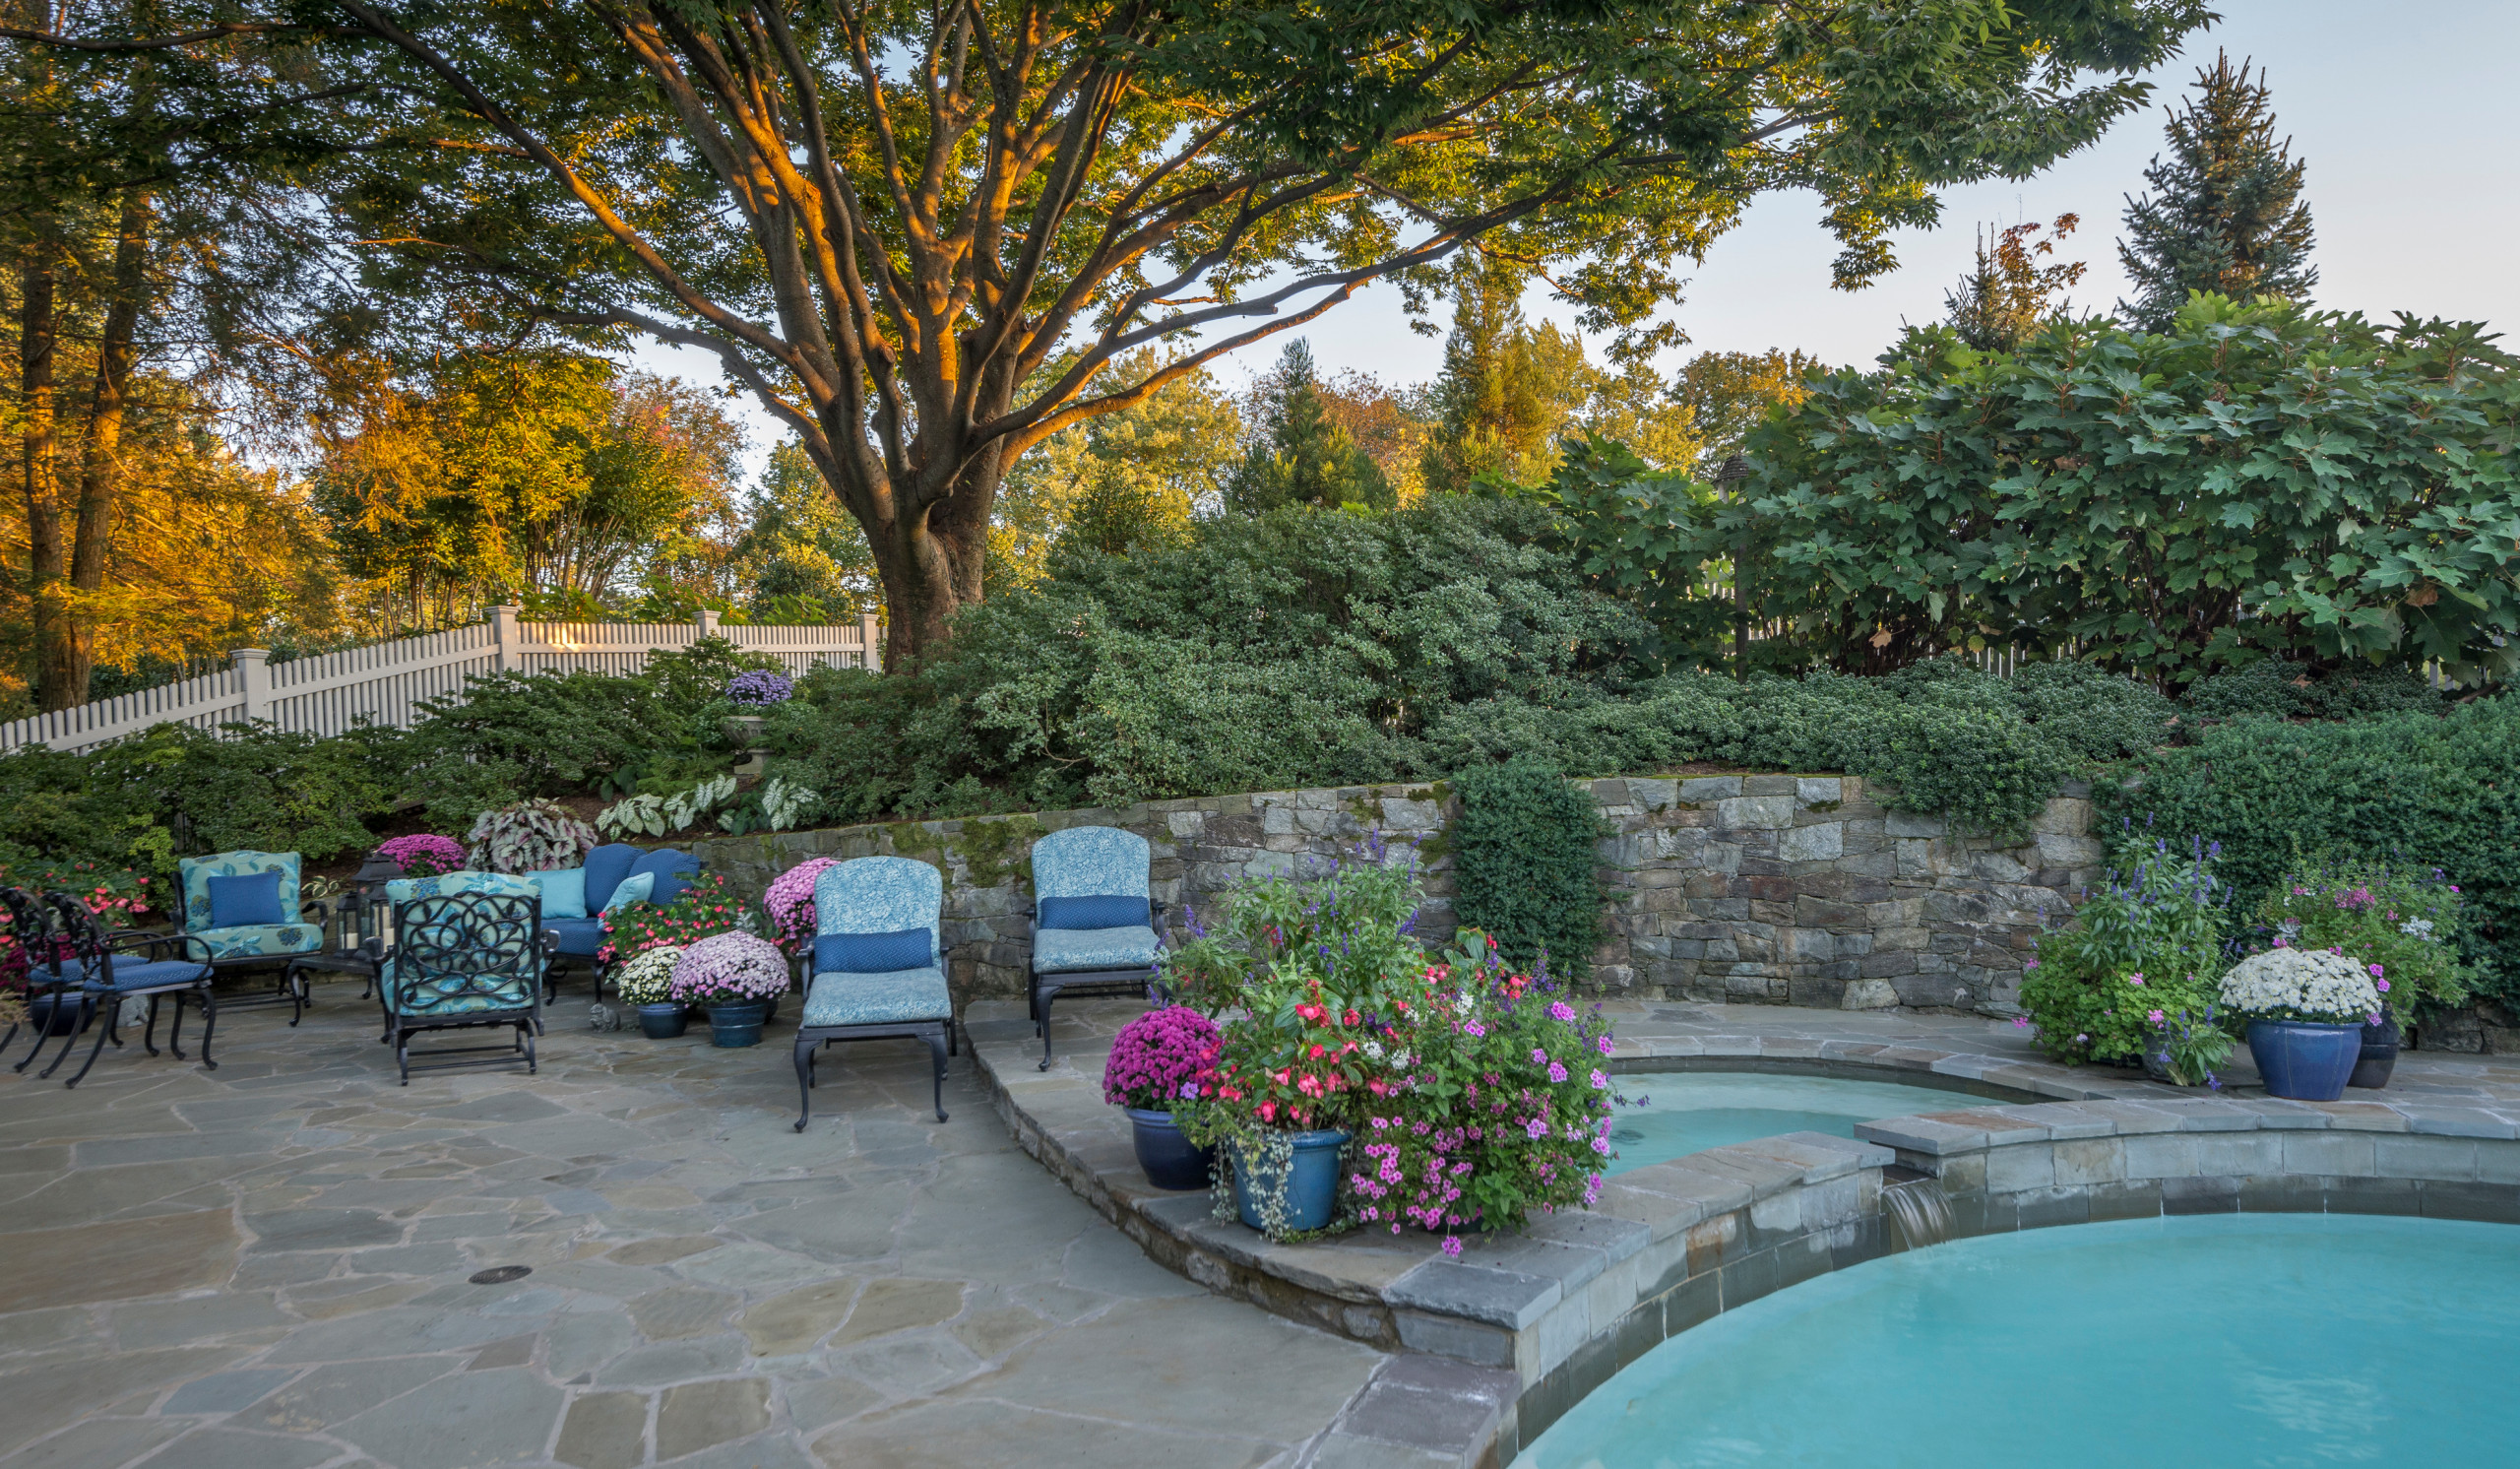 Gracious Poolside Entertaining in the Suburbs